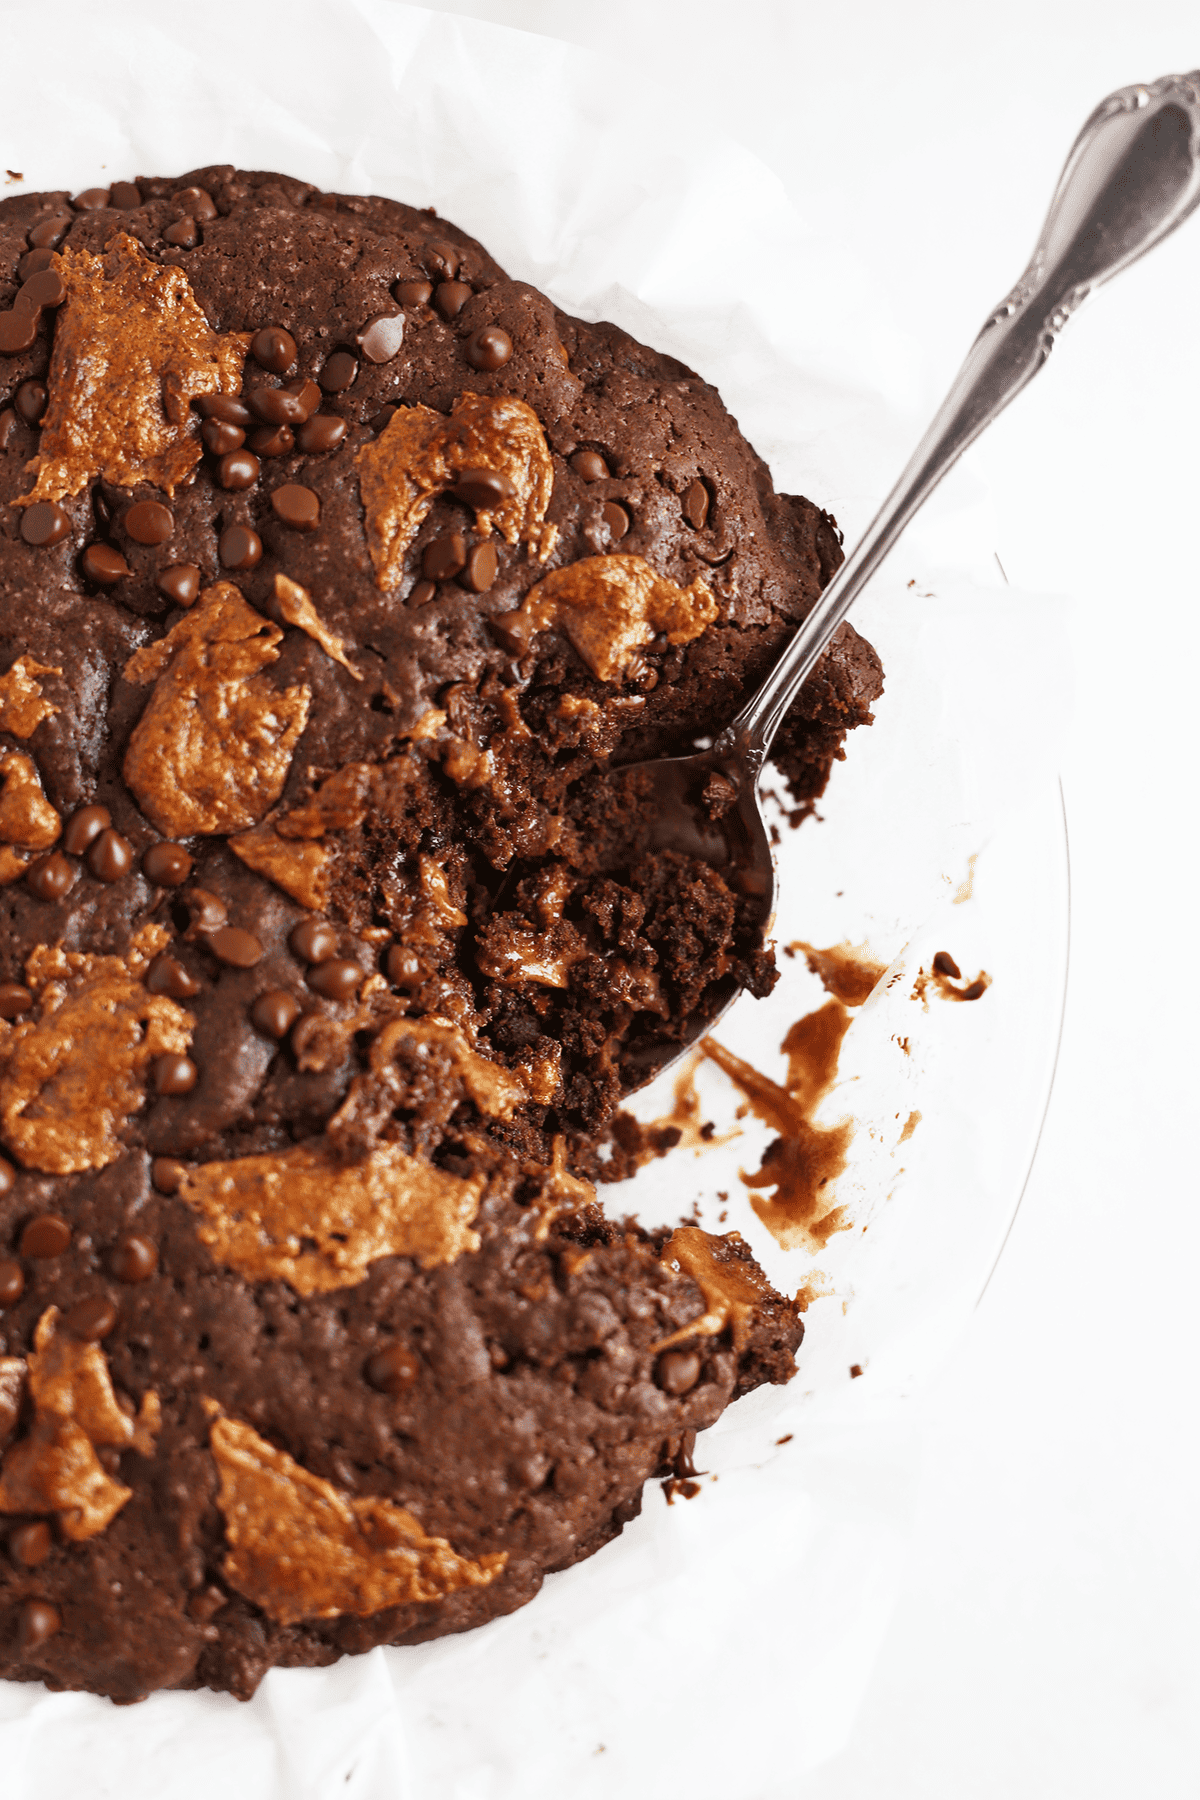 Yes, cookie and pie come together to form this super yummy Chocolate Caramel Cookie PIe that is vegan and so tasty! loaded with chocolate chips and caramel!